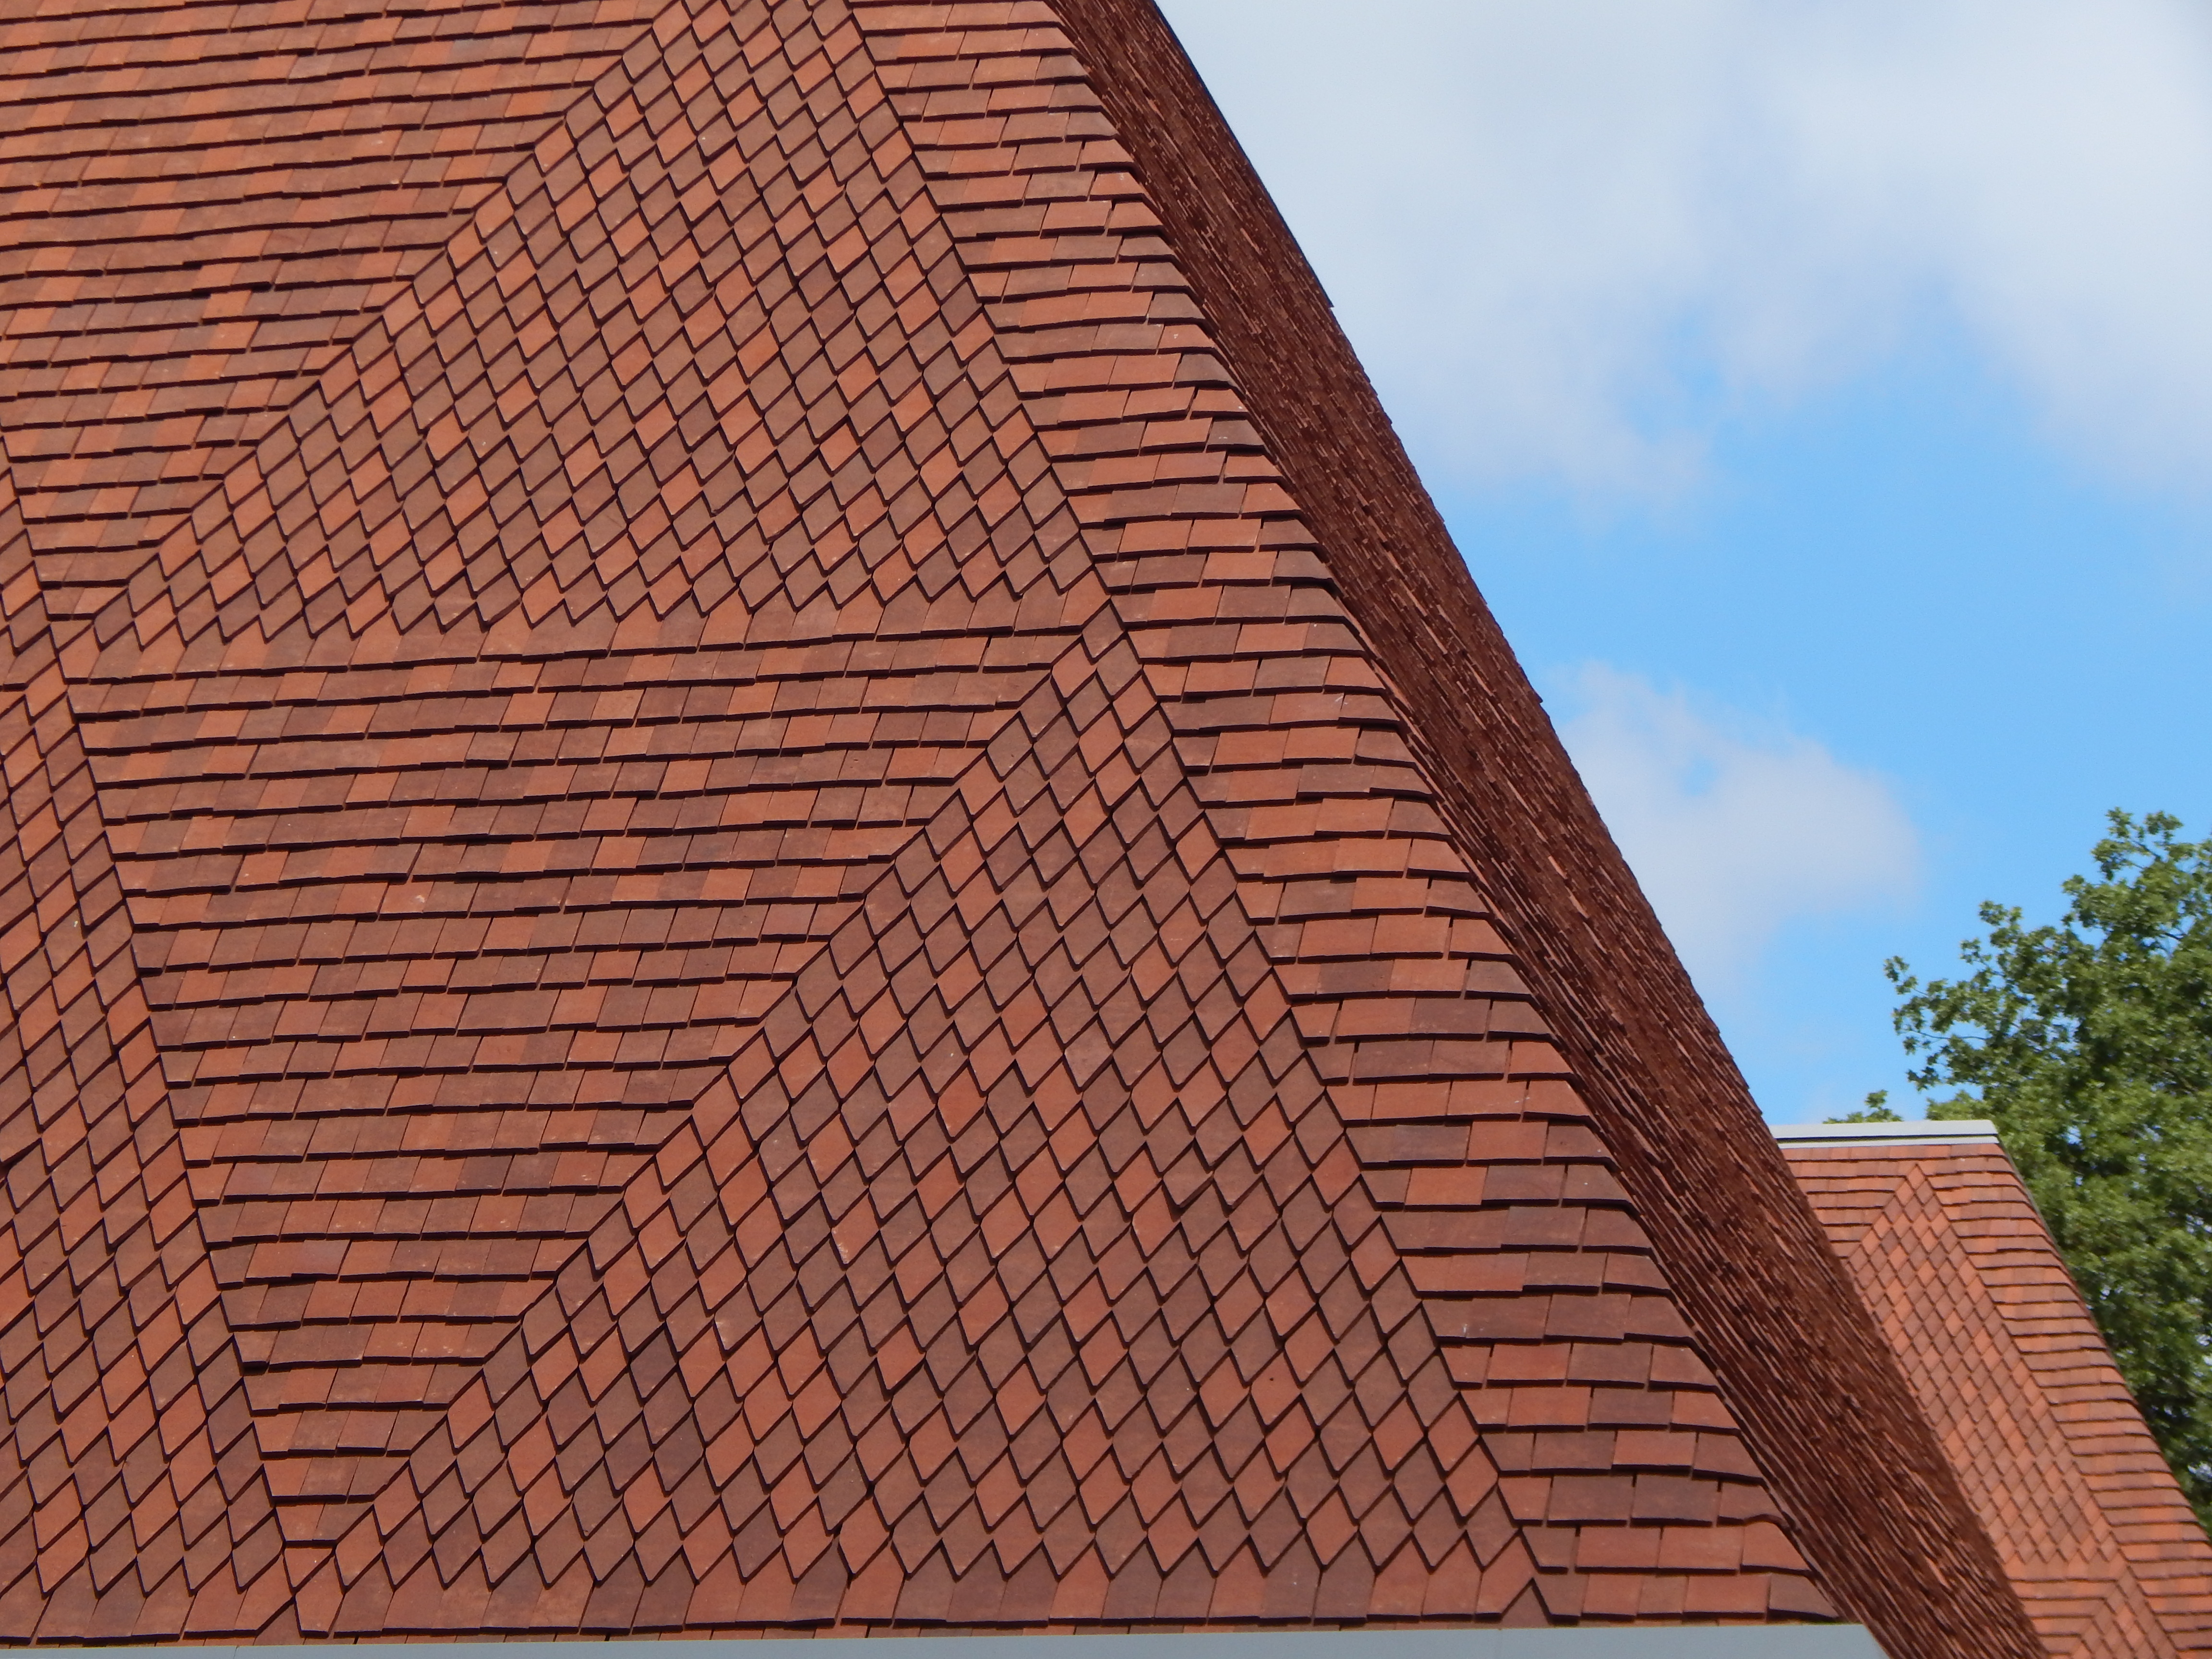 Tudor Roof Tiles secure award for King’s College Music School